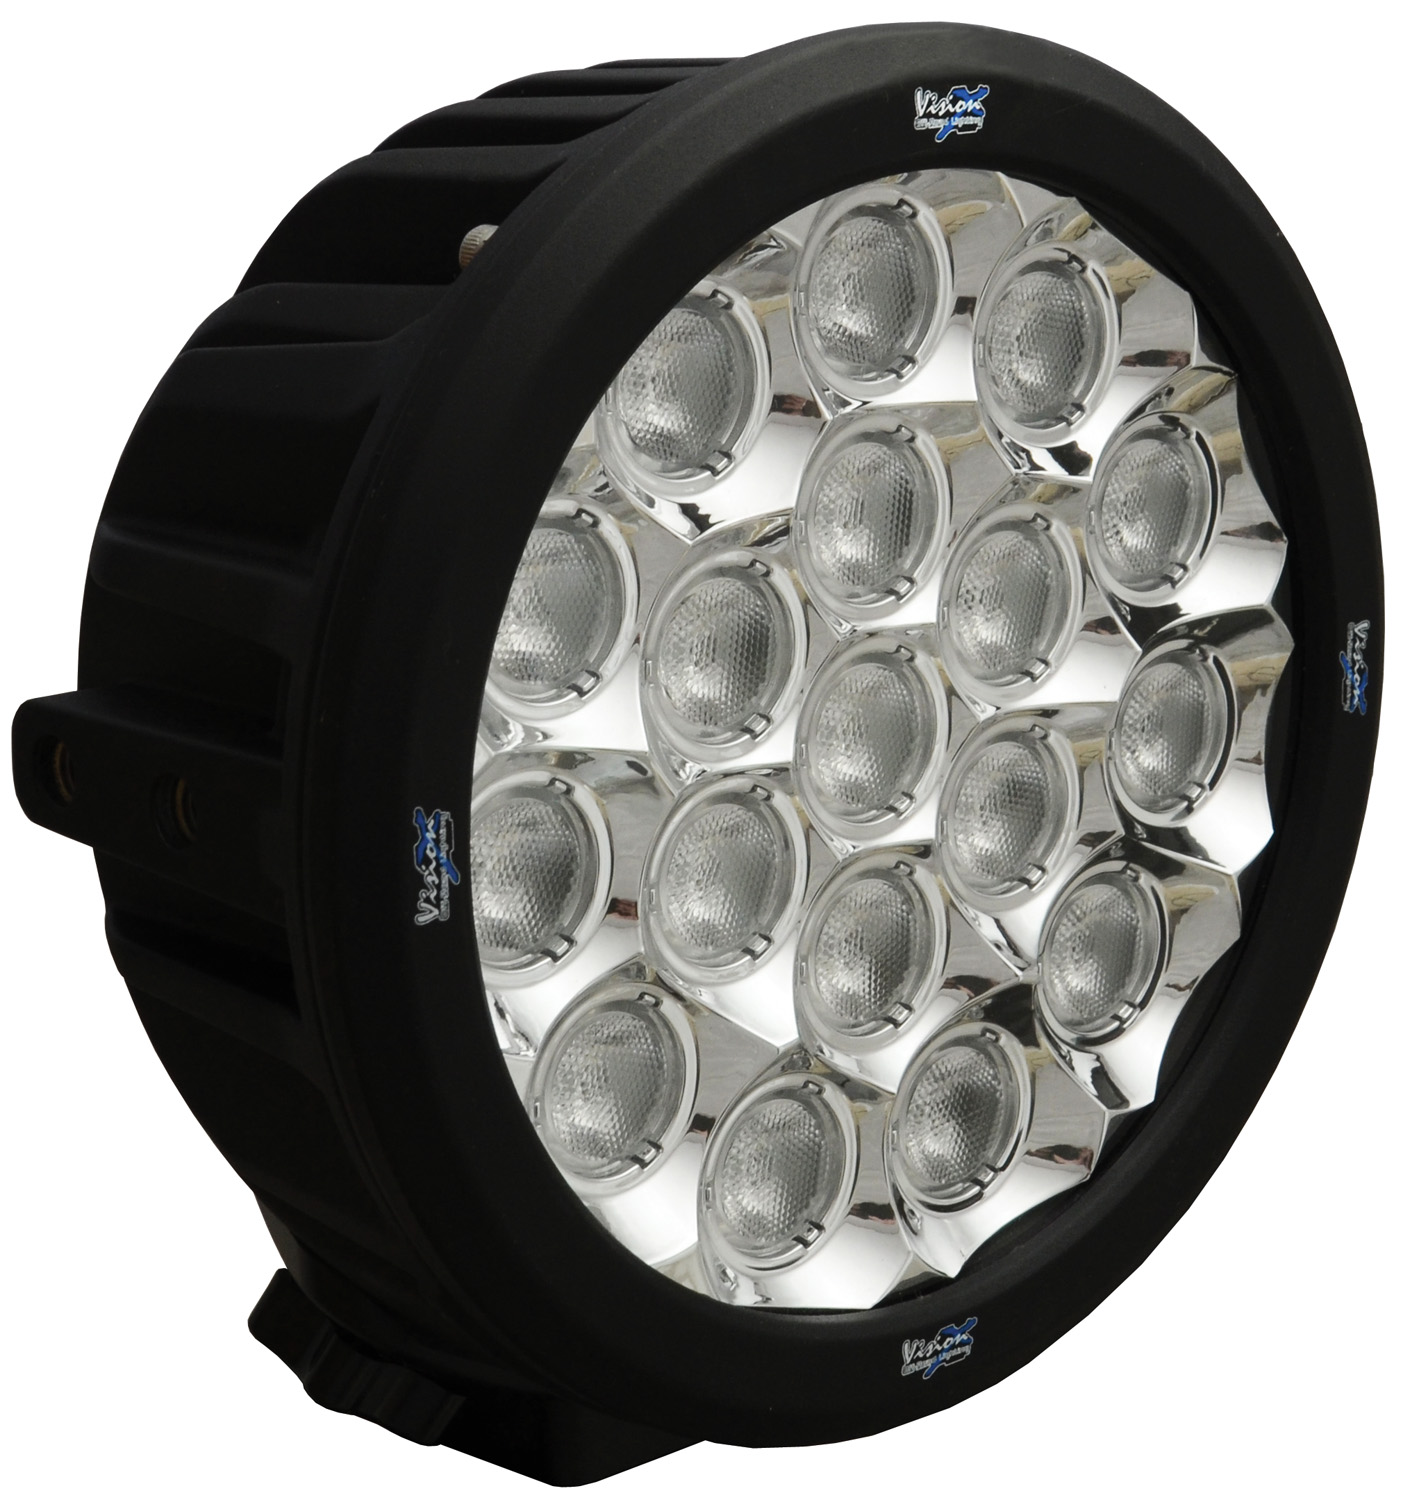 6" TRANSPORTER XTREME 18 5W LED 40_ WIDE - Click Image to Close